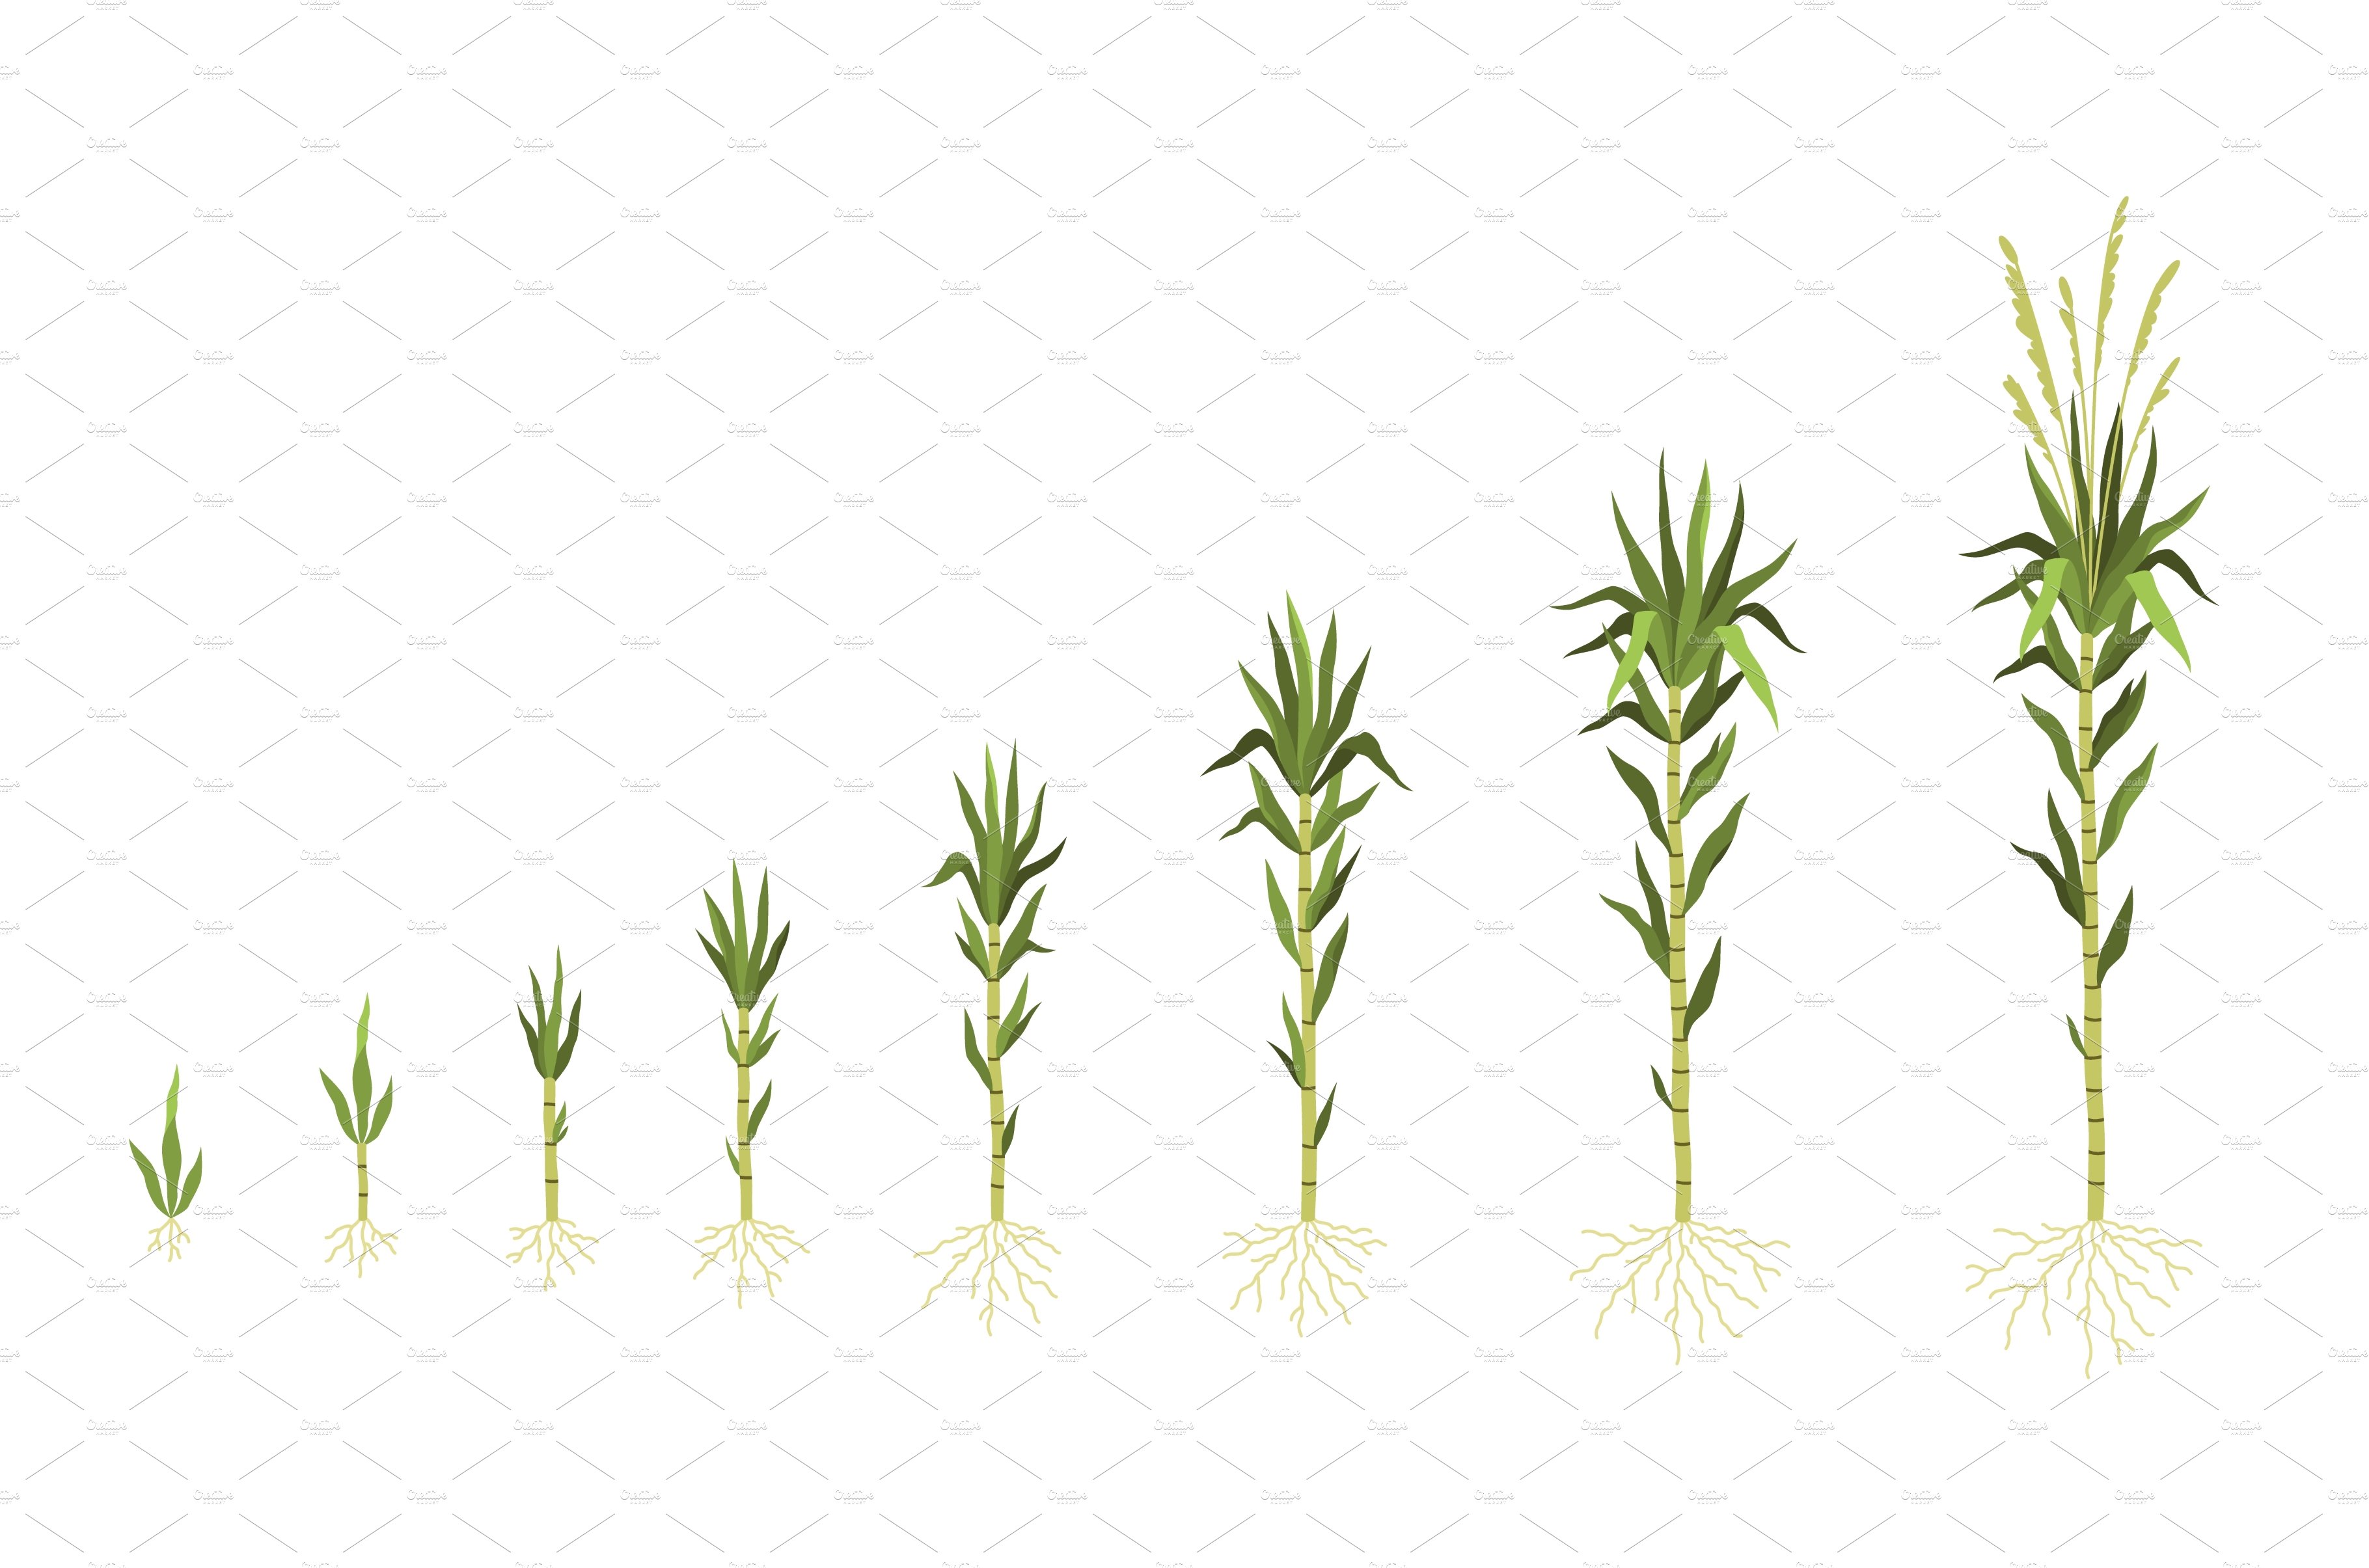 Row of green plants with roots on a white background.